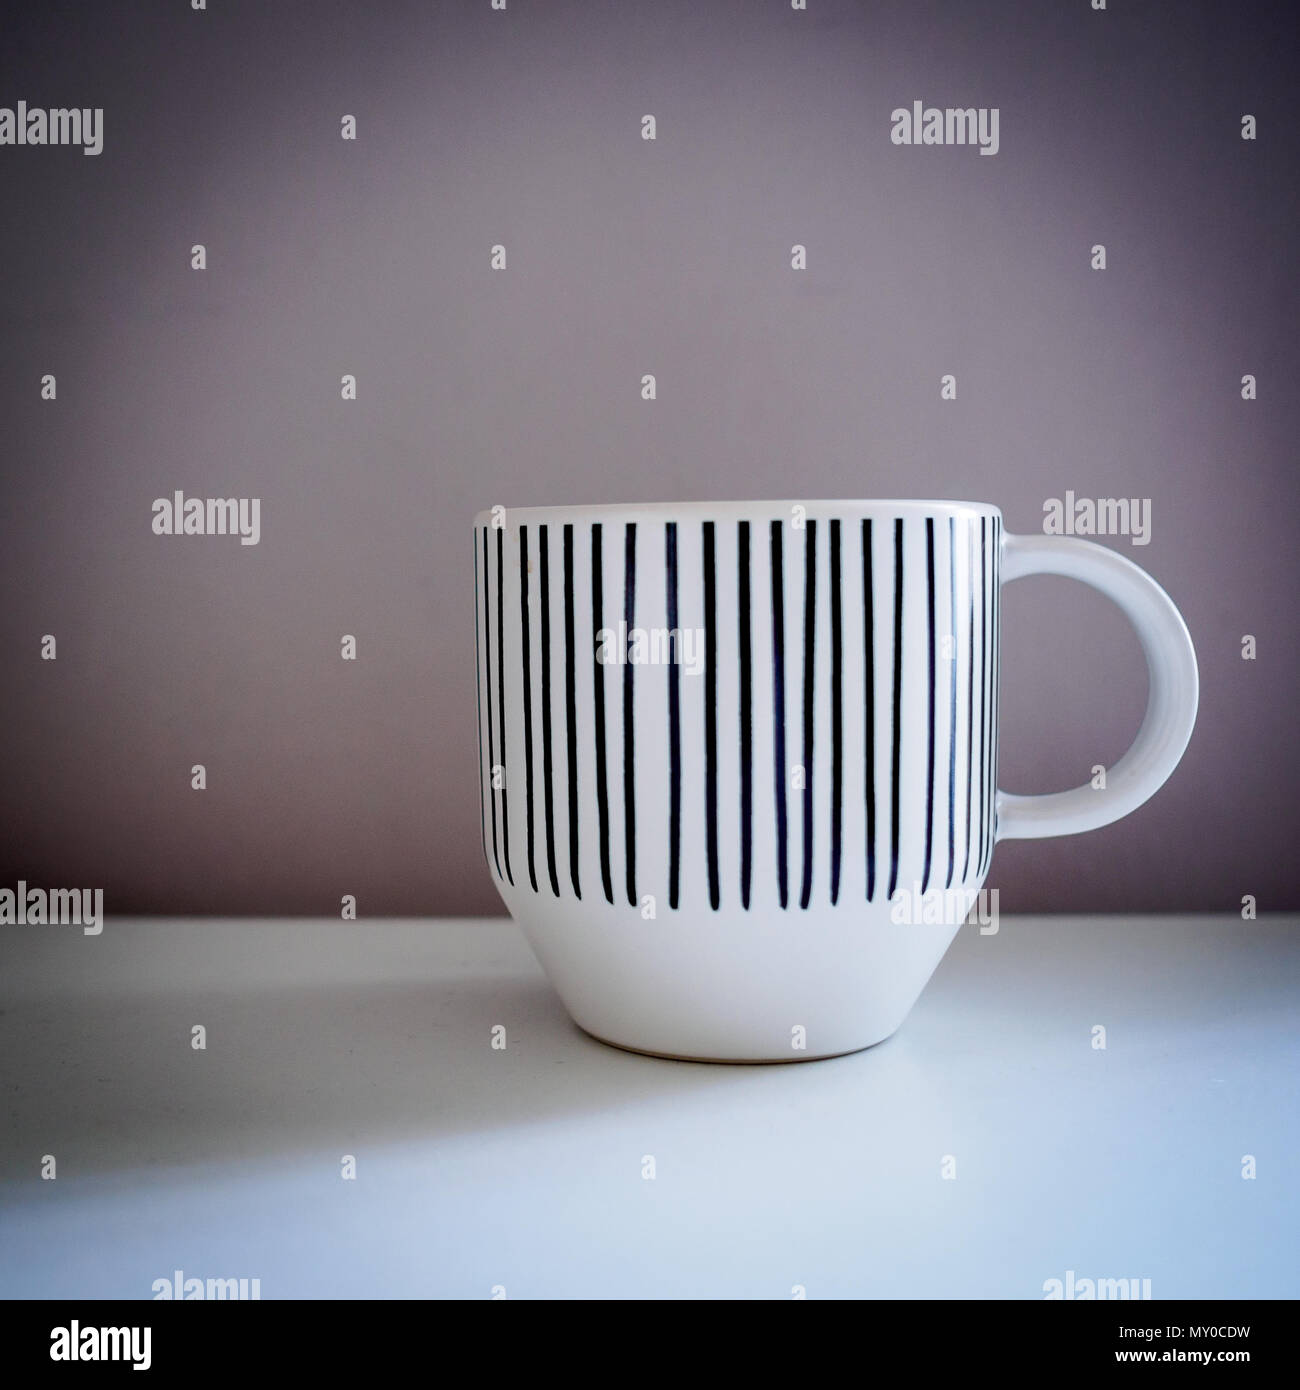 White mug with black lines decorations on a white table. Vintage look filter. Square format. Stock Photo